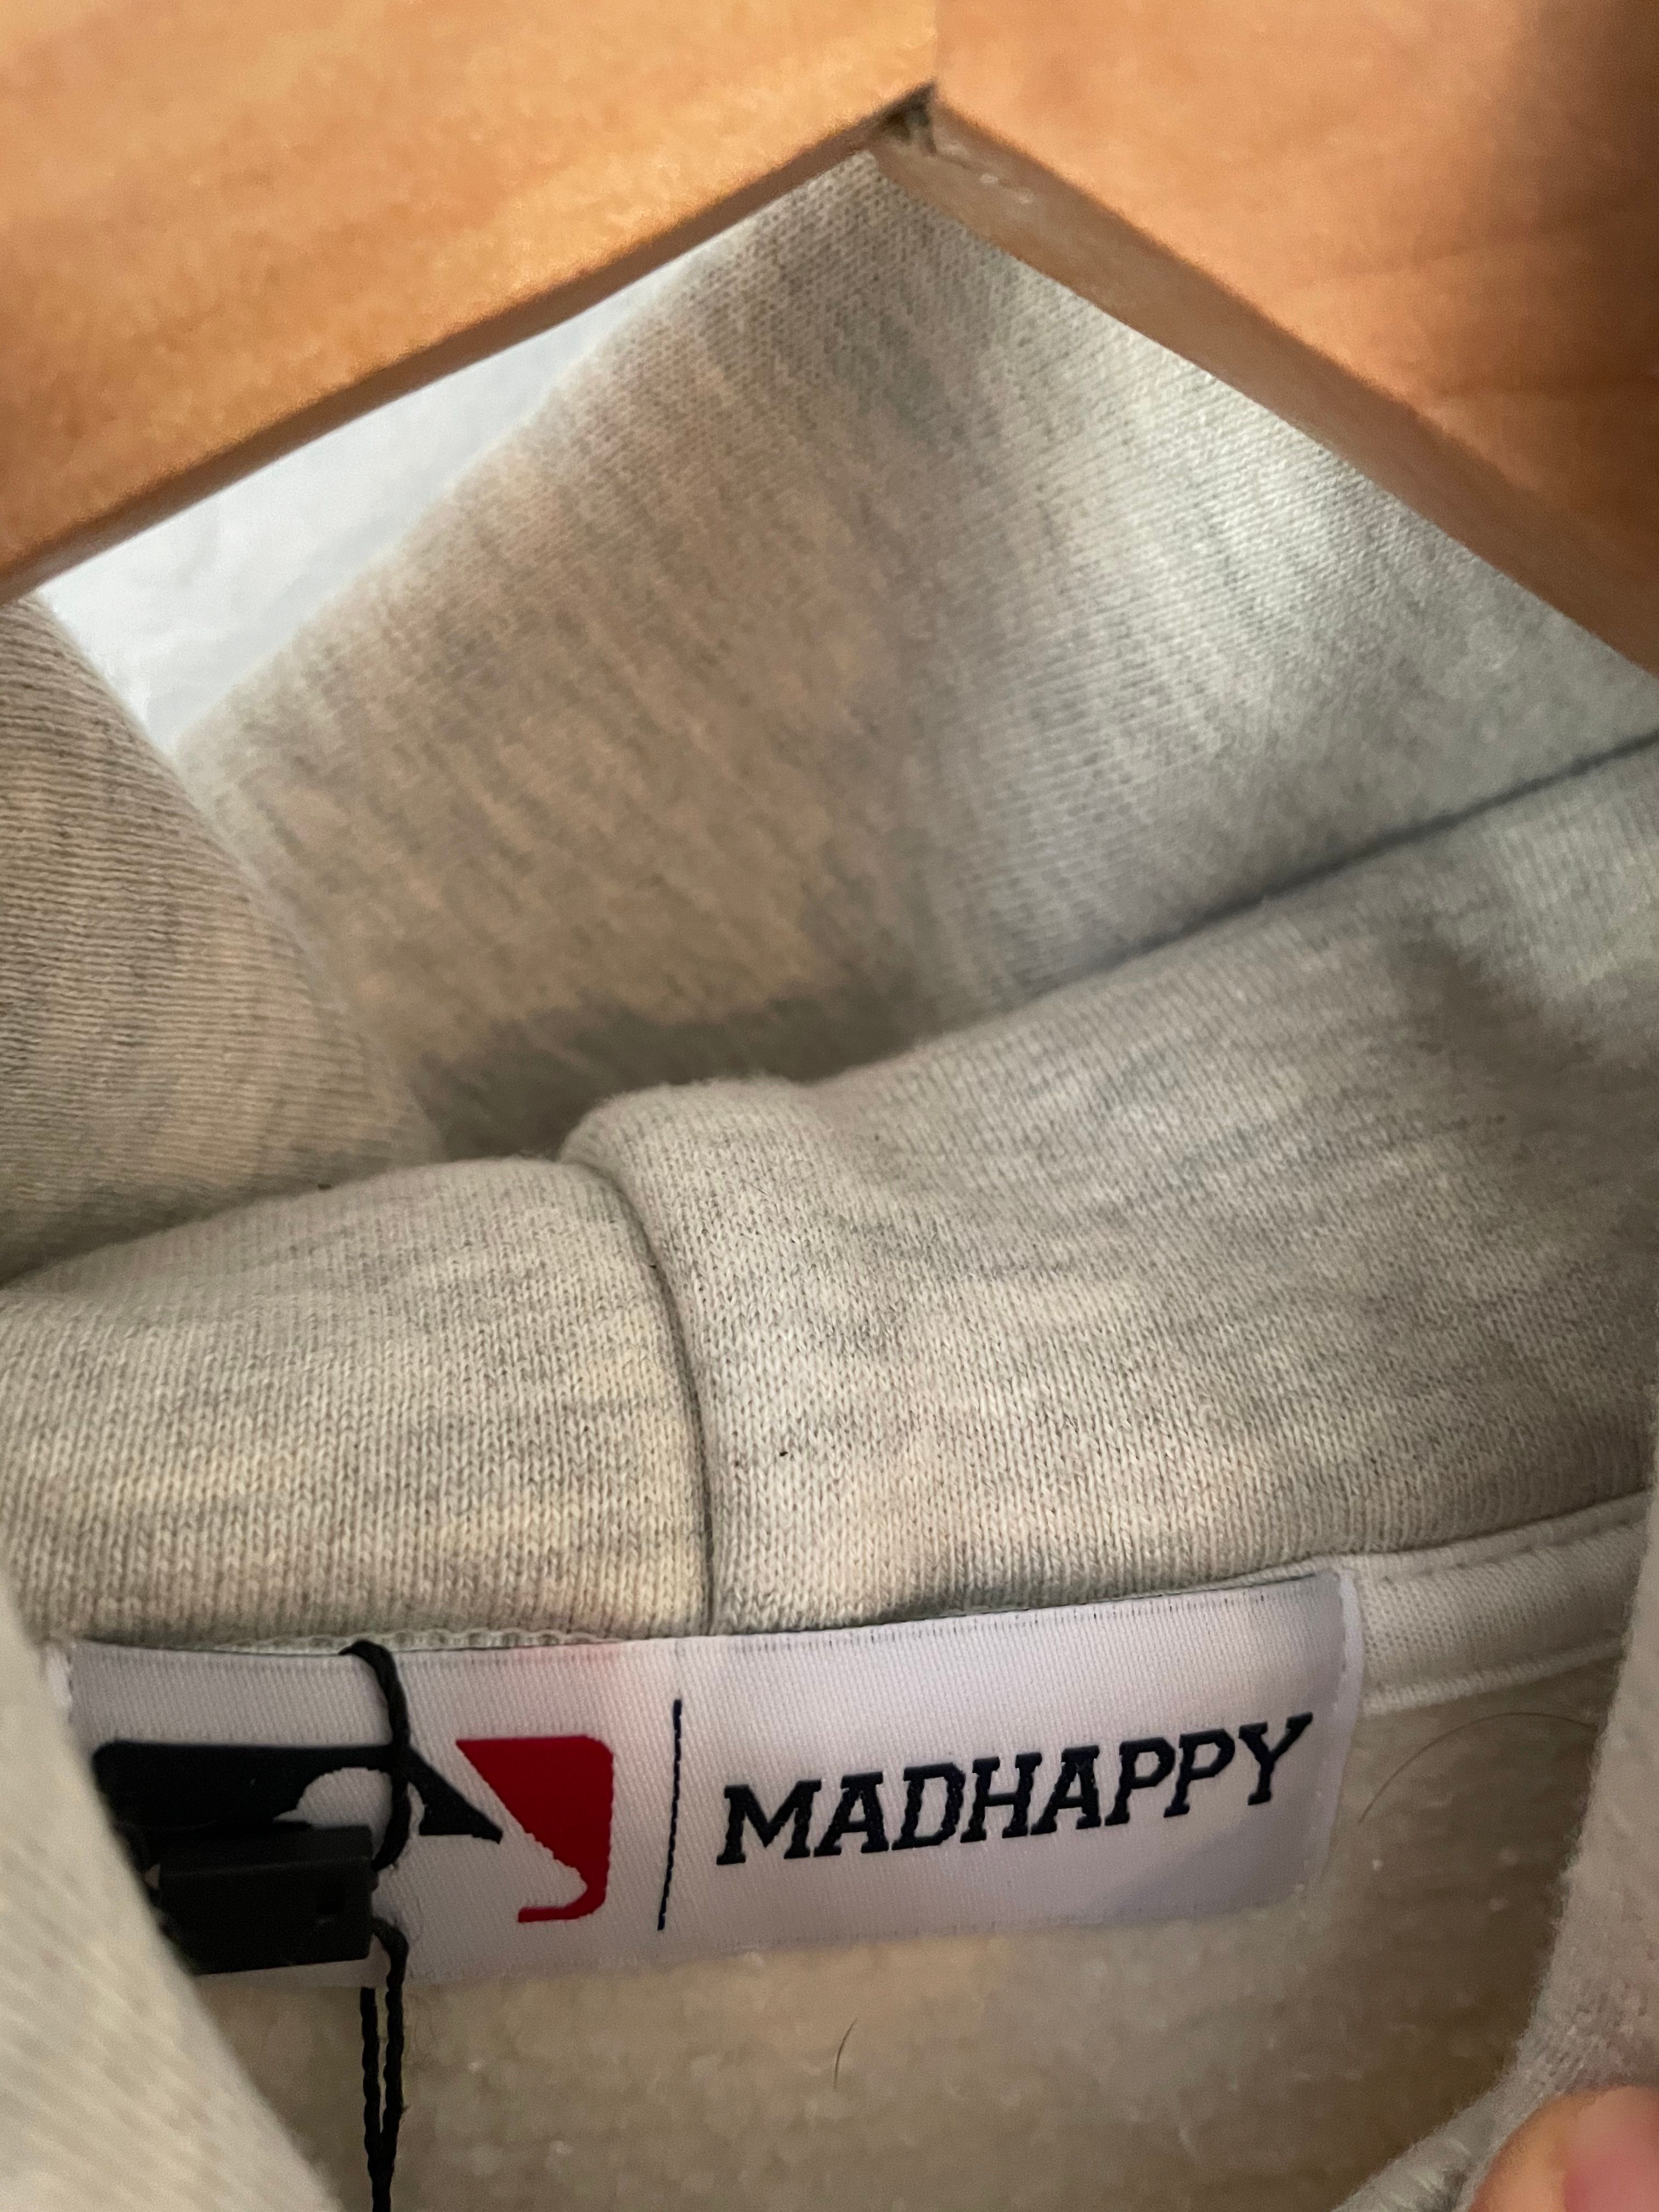 Madhappy Los Angeles Dodgers x MadHappy SIDE POCKET HERITAGE HOODIE Size US M / EU 48-50 / 2 - 8 Preview